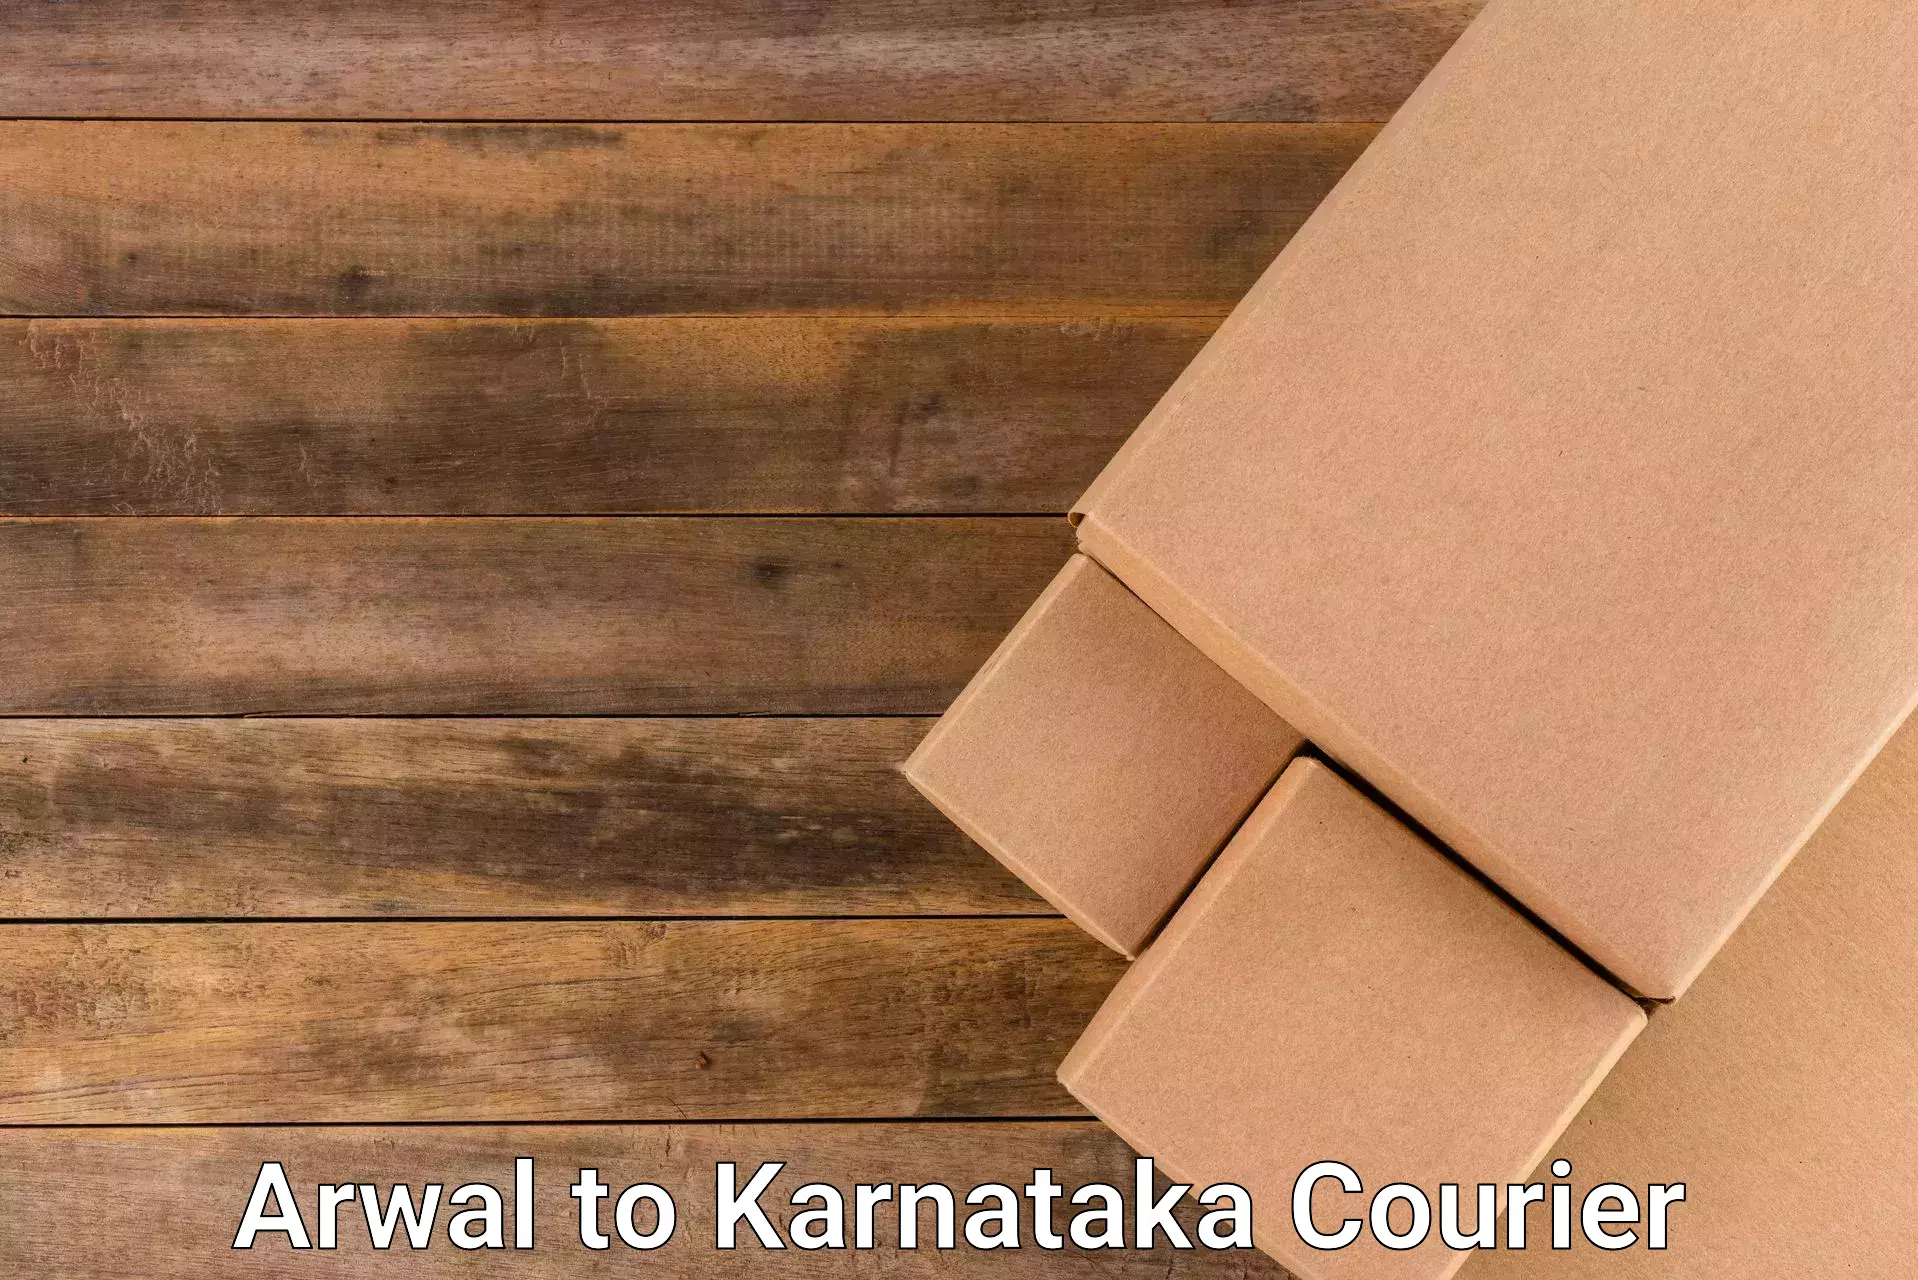 Courier service innovation in Arwal to Karnataka